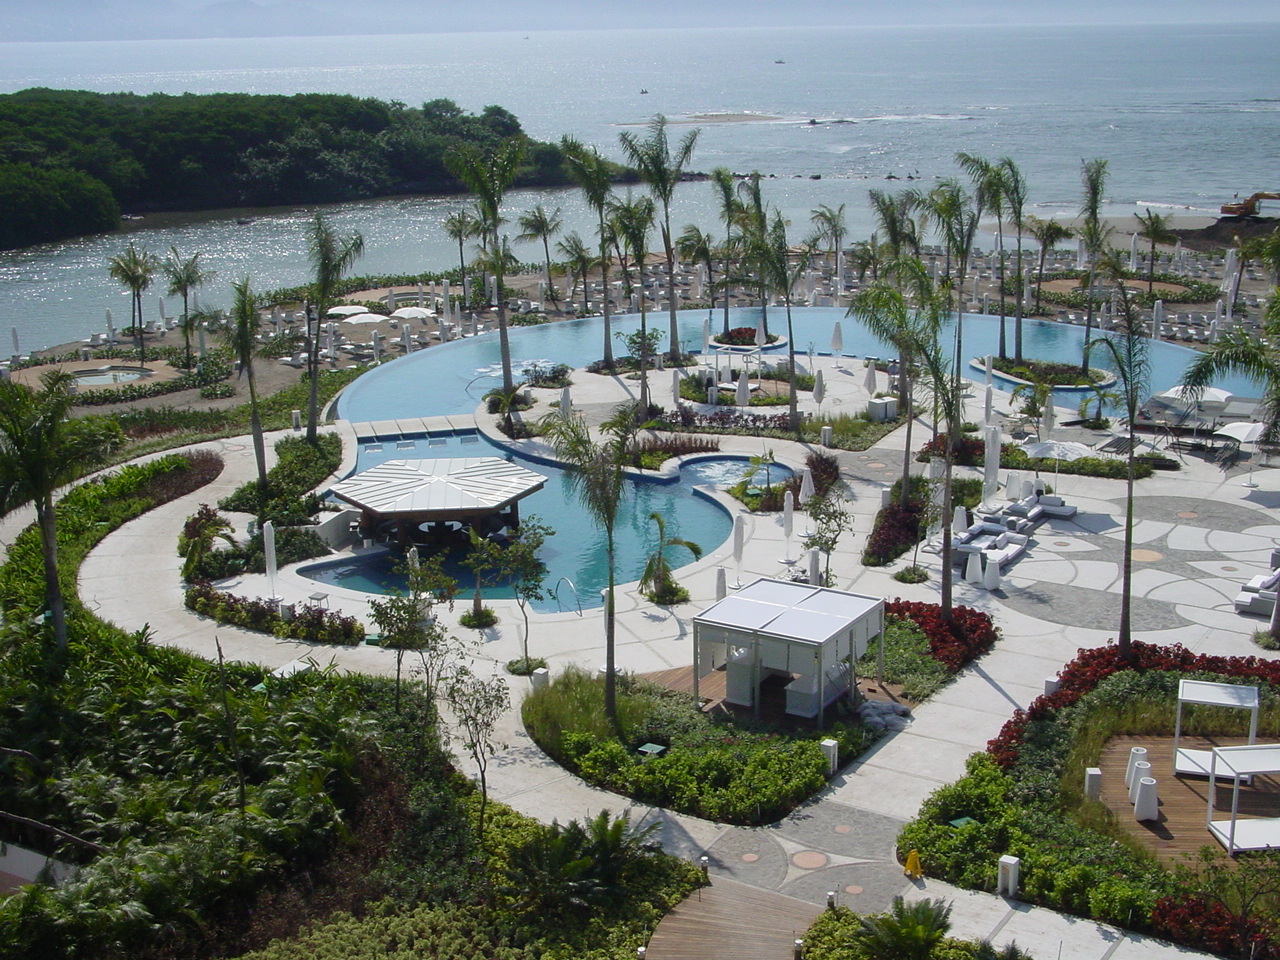 This pool is the South Pool and is closest to the Ameca River.  It is also the closest pool to the beach deck, with lounges that face west and south west to Puerto Vallarta.